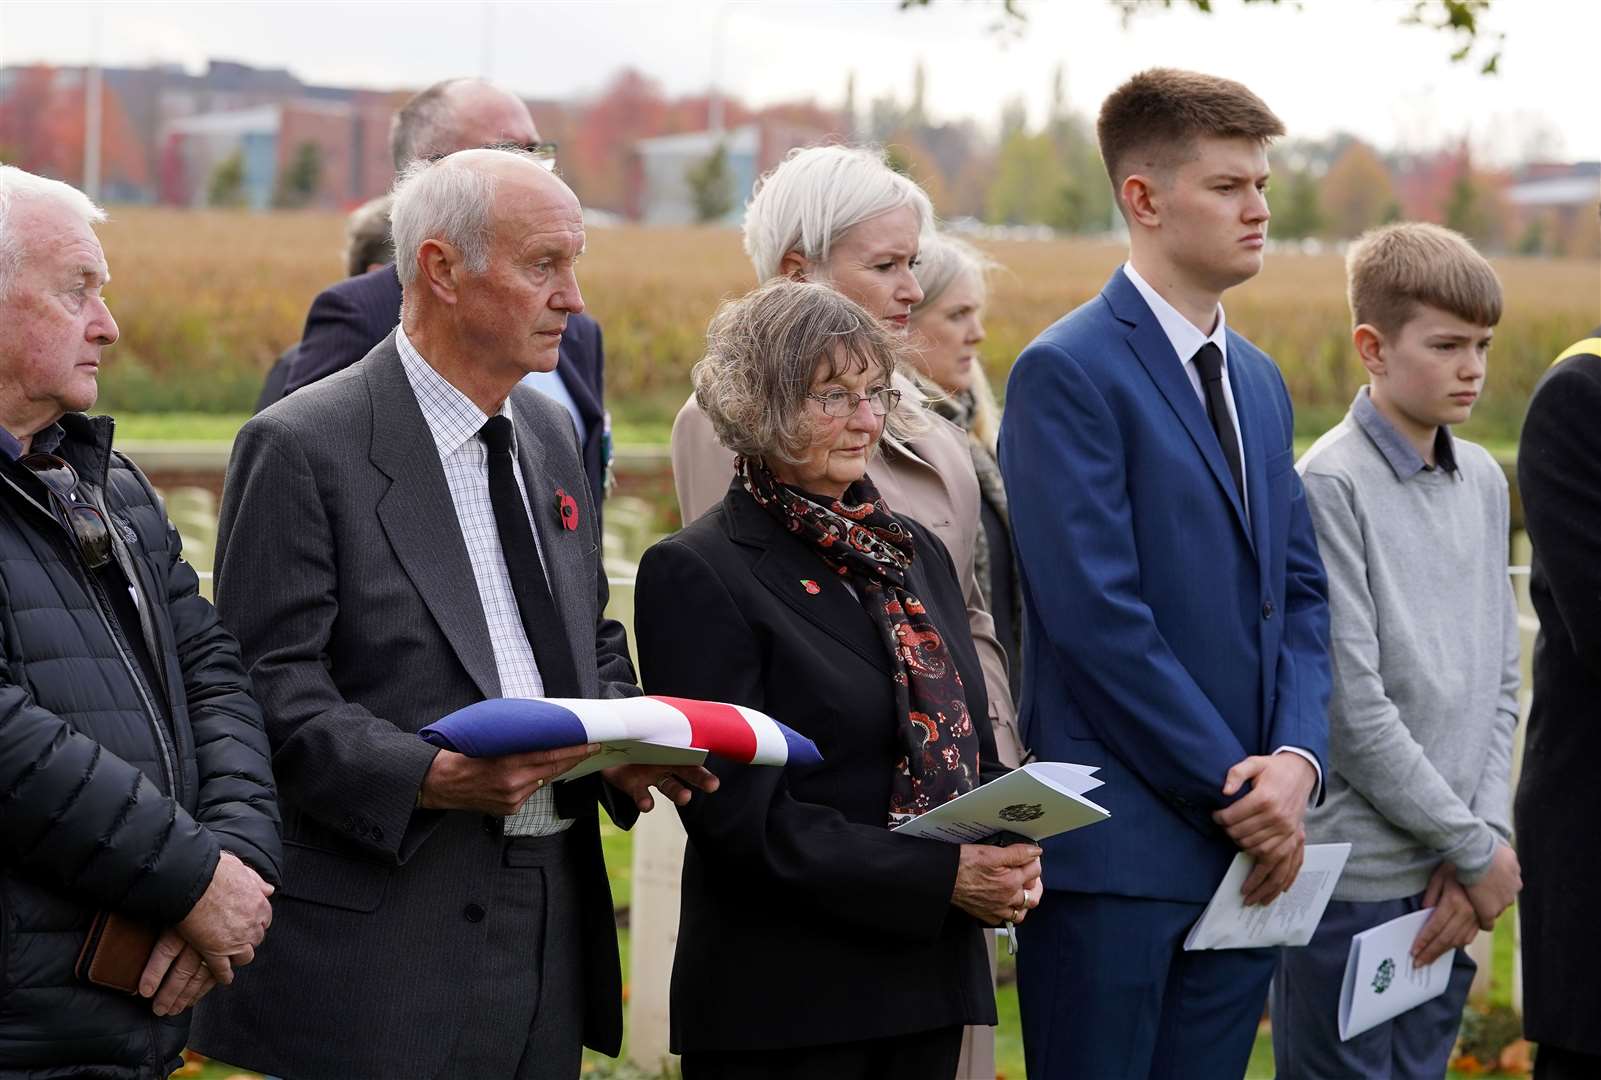 Family members watch as he is laid to rest (Gareth Fuller/PA)